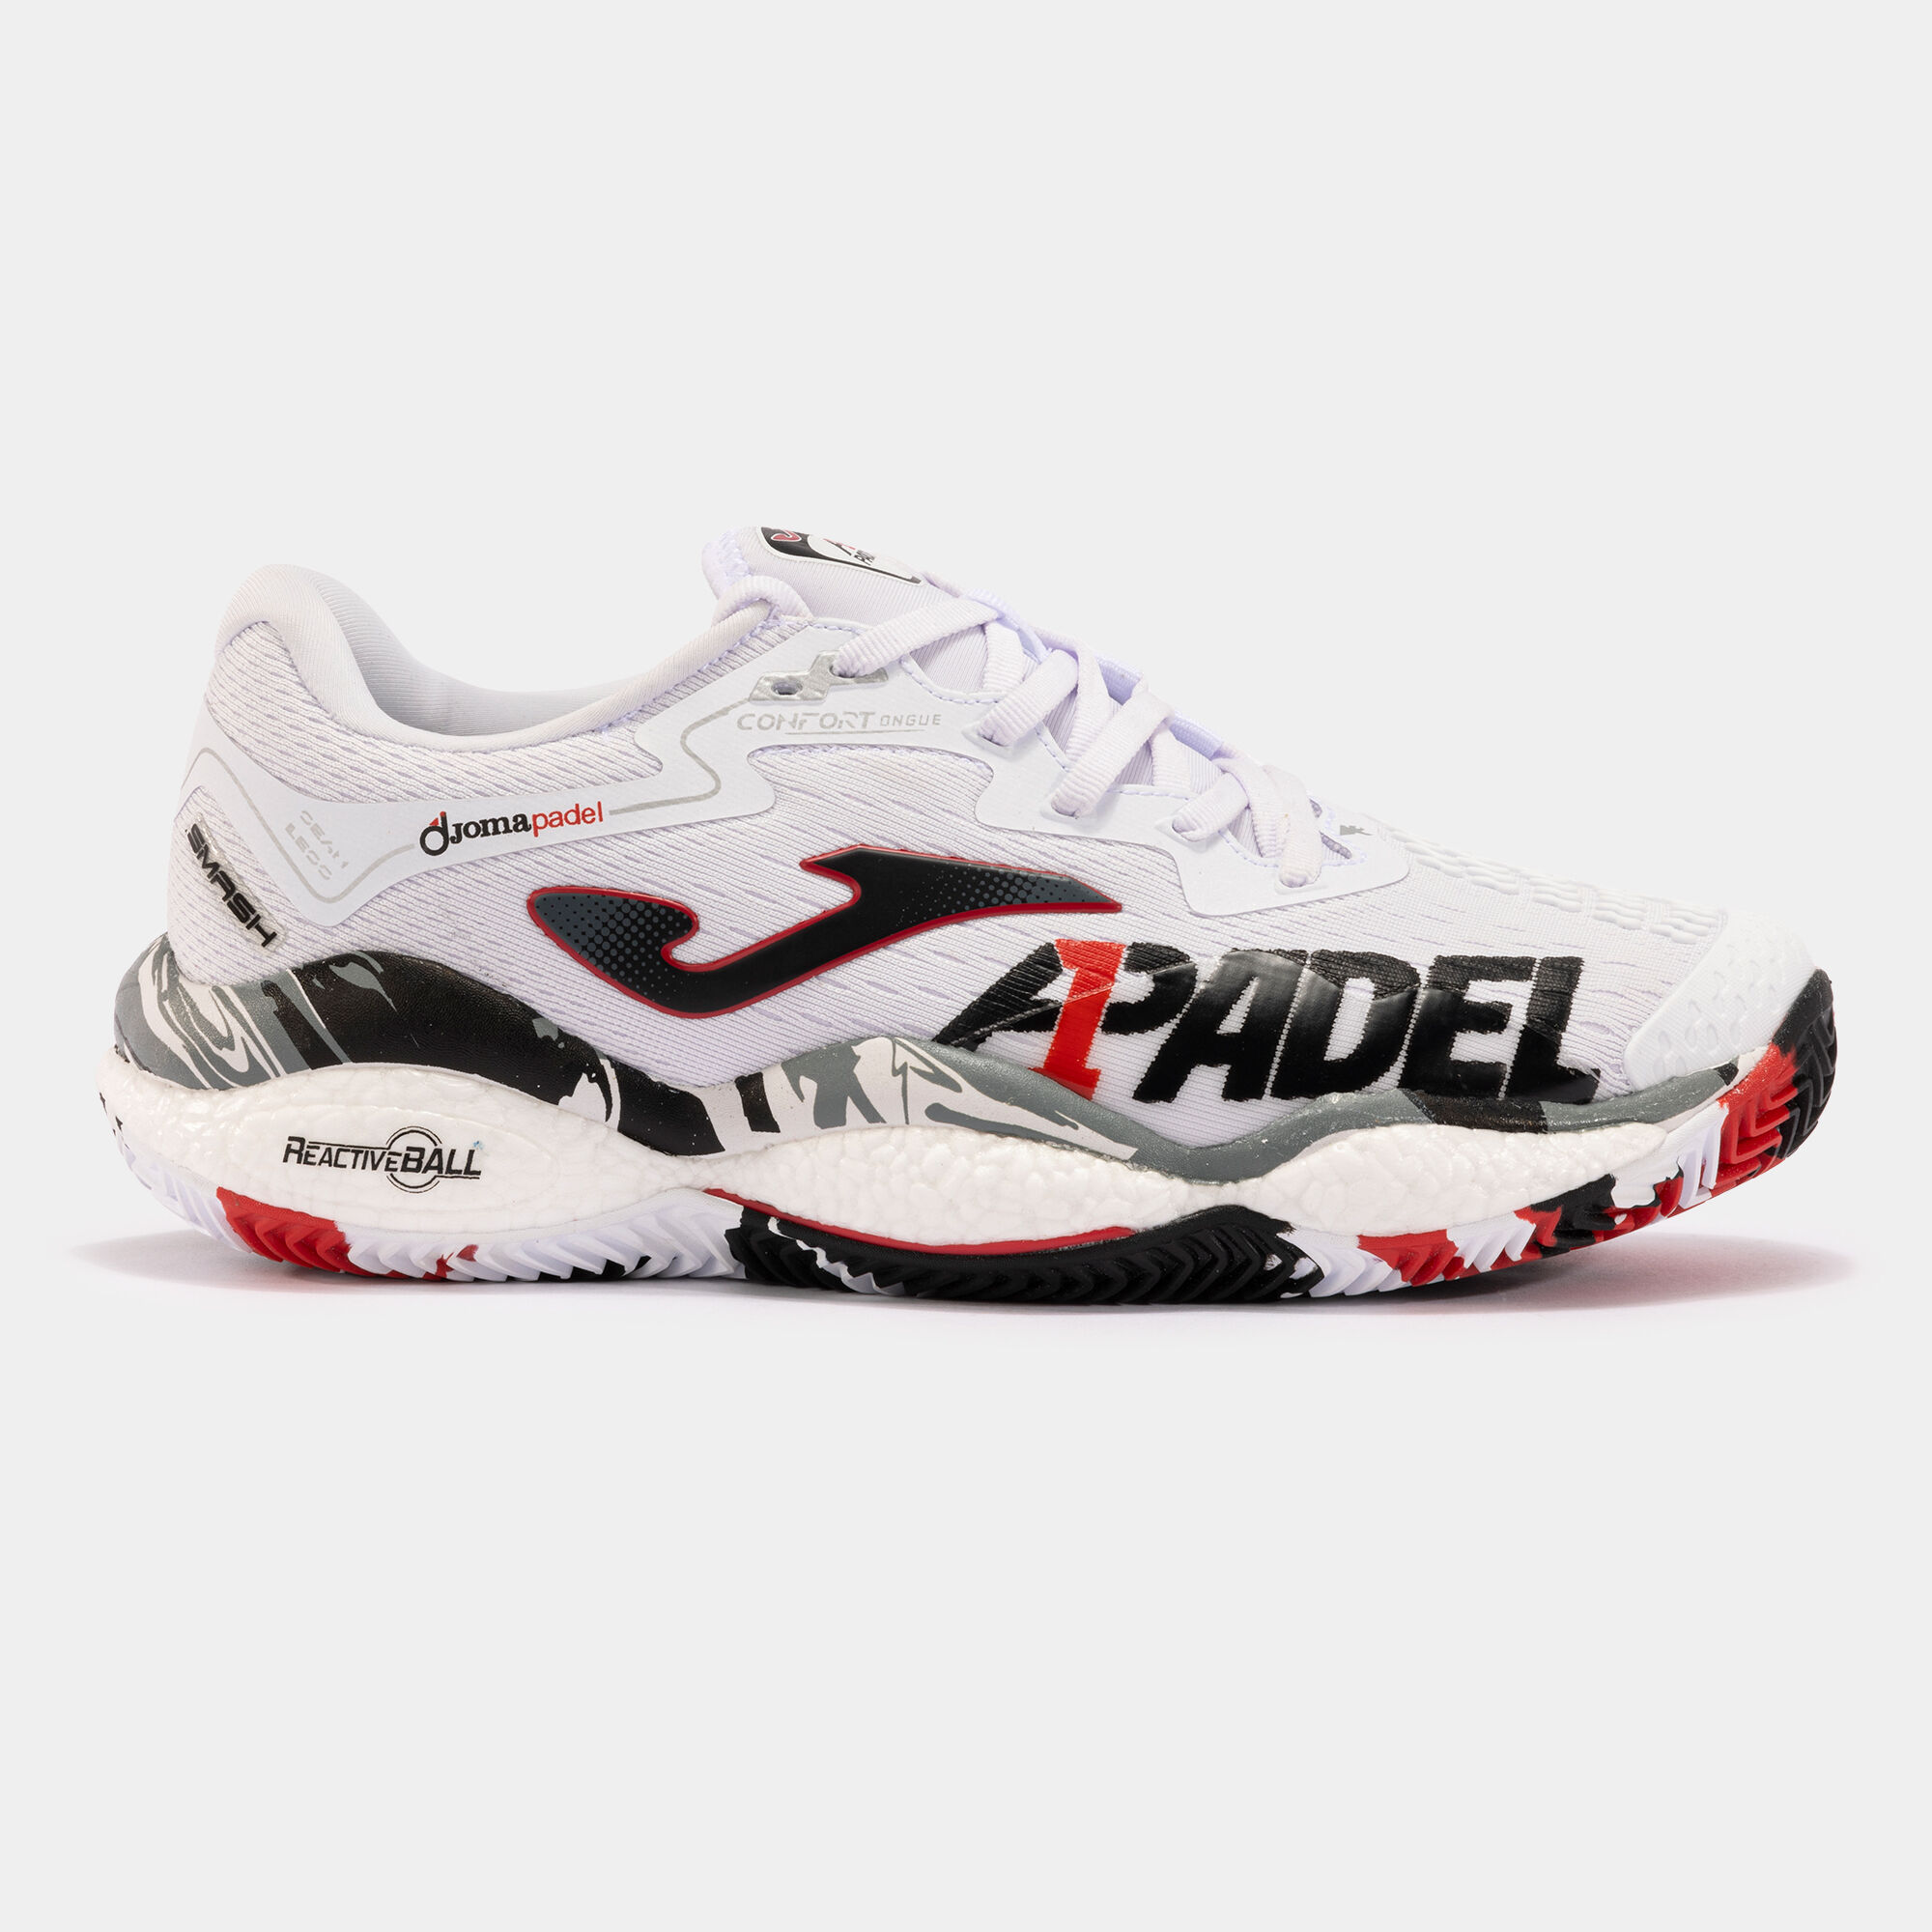 Chaussures A1 Padel terre battue unisexe blanc